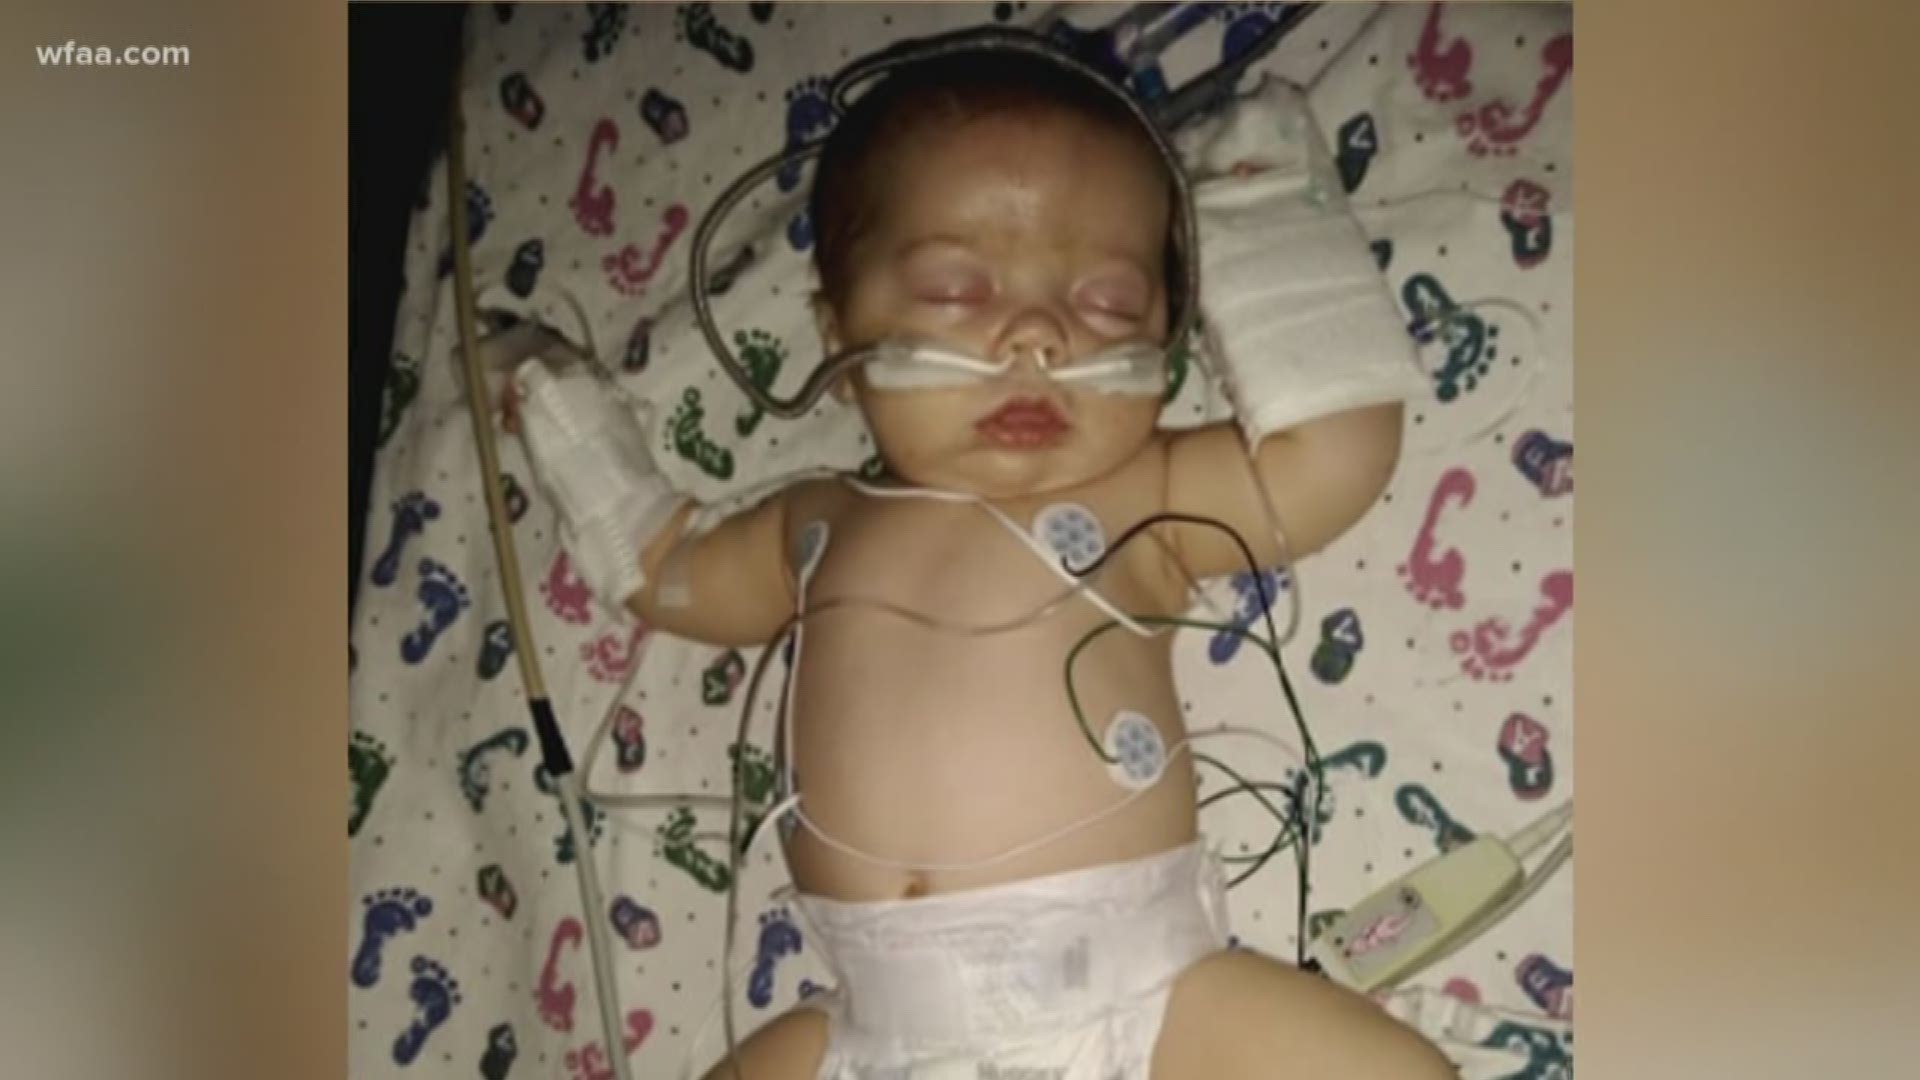 Baby Jax is still in the hospital, fighting to survive, his great-aunt says.